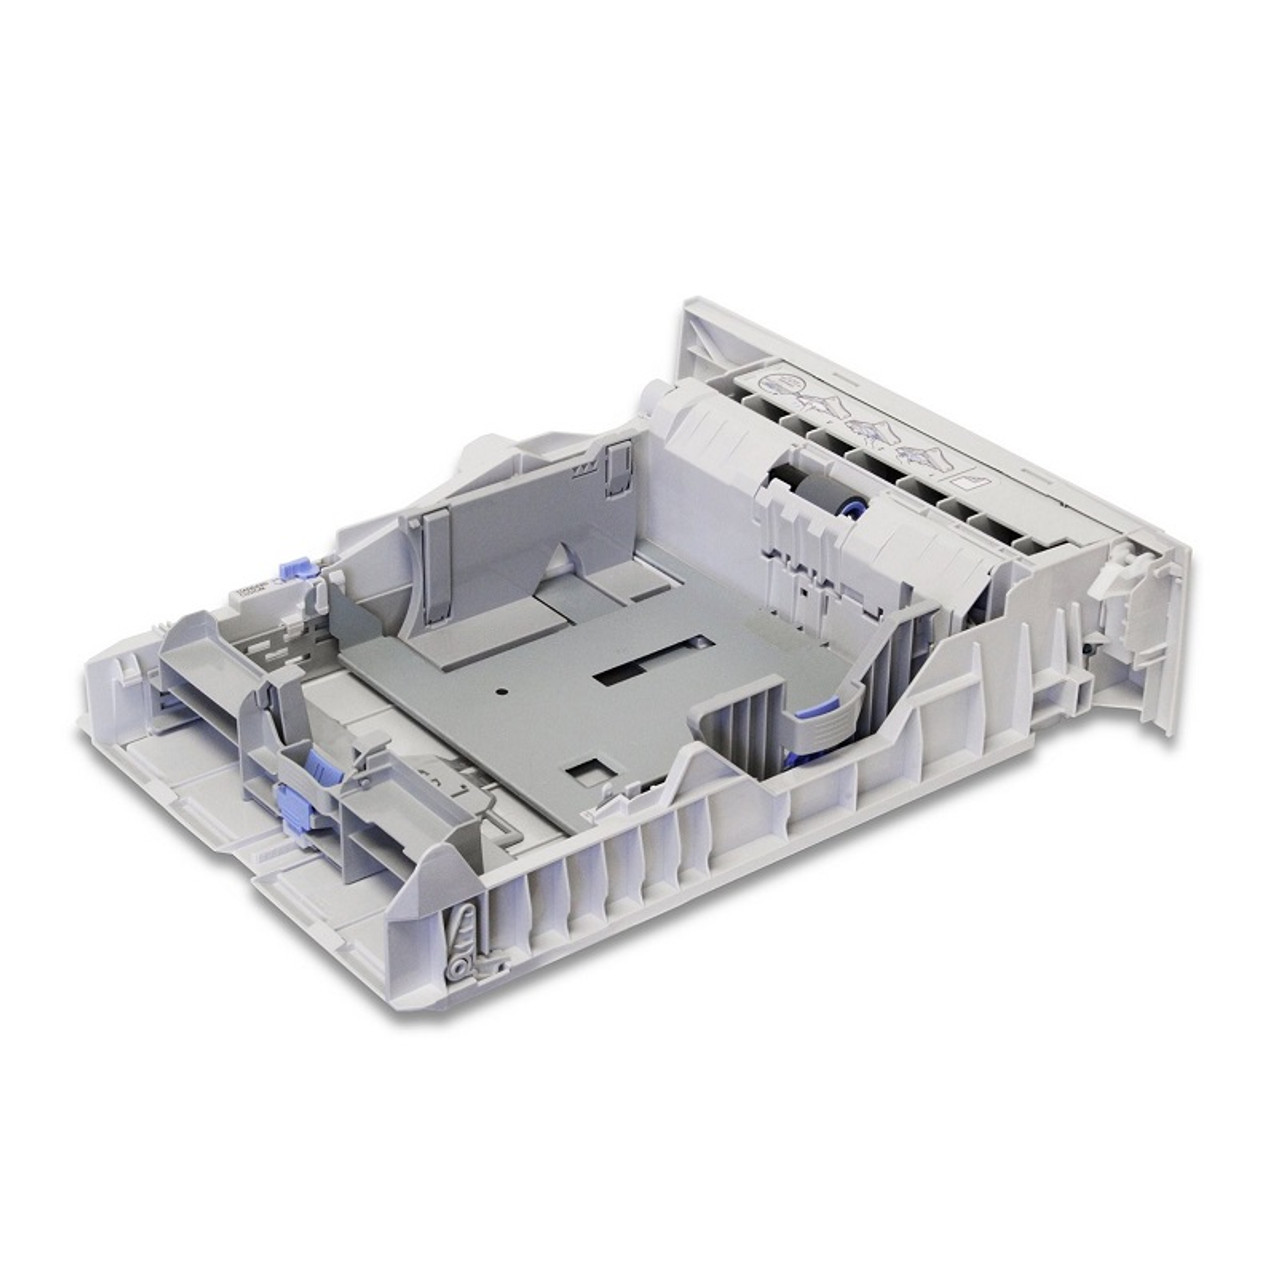 Q6211A - HP 250-Sheets Paper Input Tray for Officejet 7310 / 7400 Series Printer (Refurbished / Grade-A)